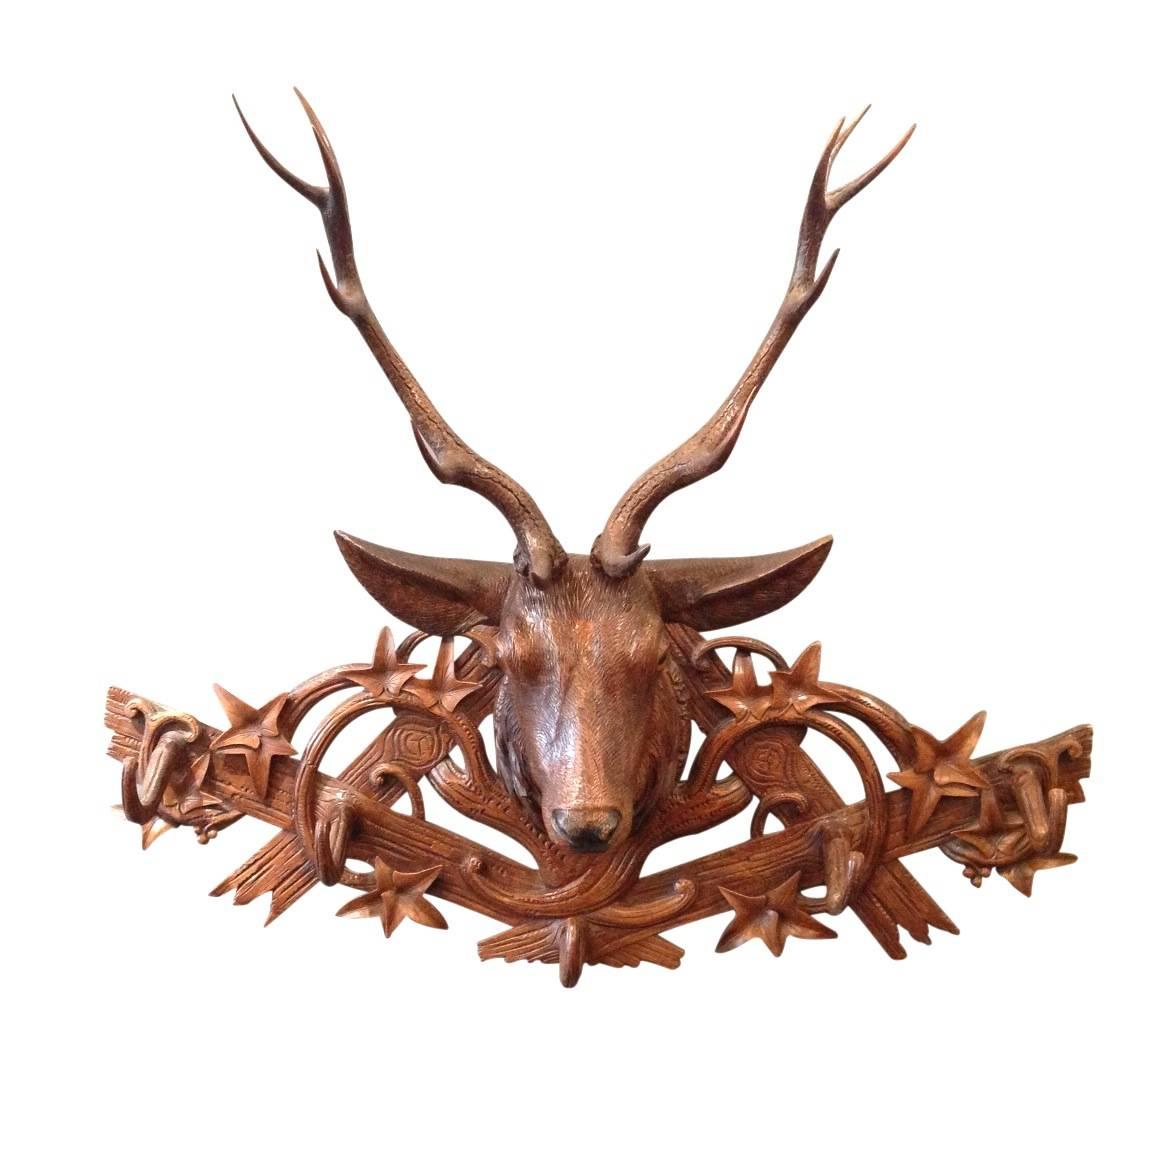 Late 19th Century Swiss Black Forest Carved Stag Rack